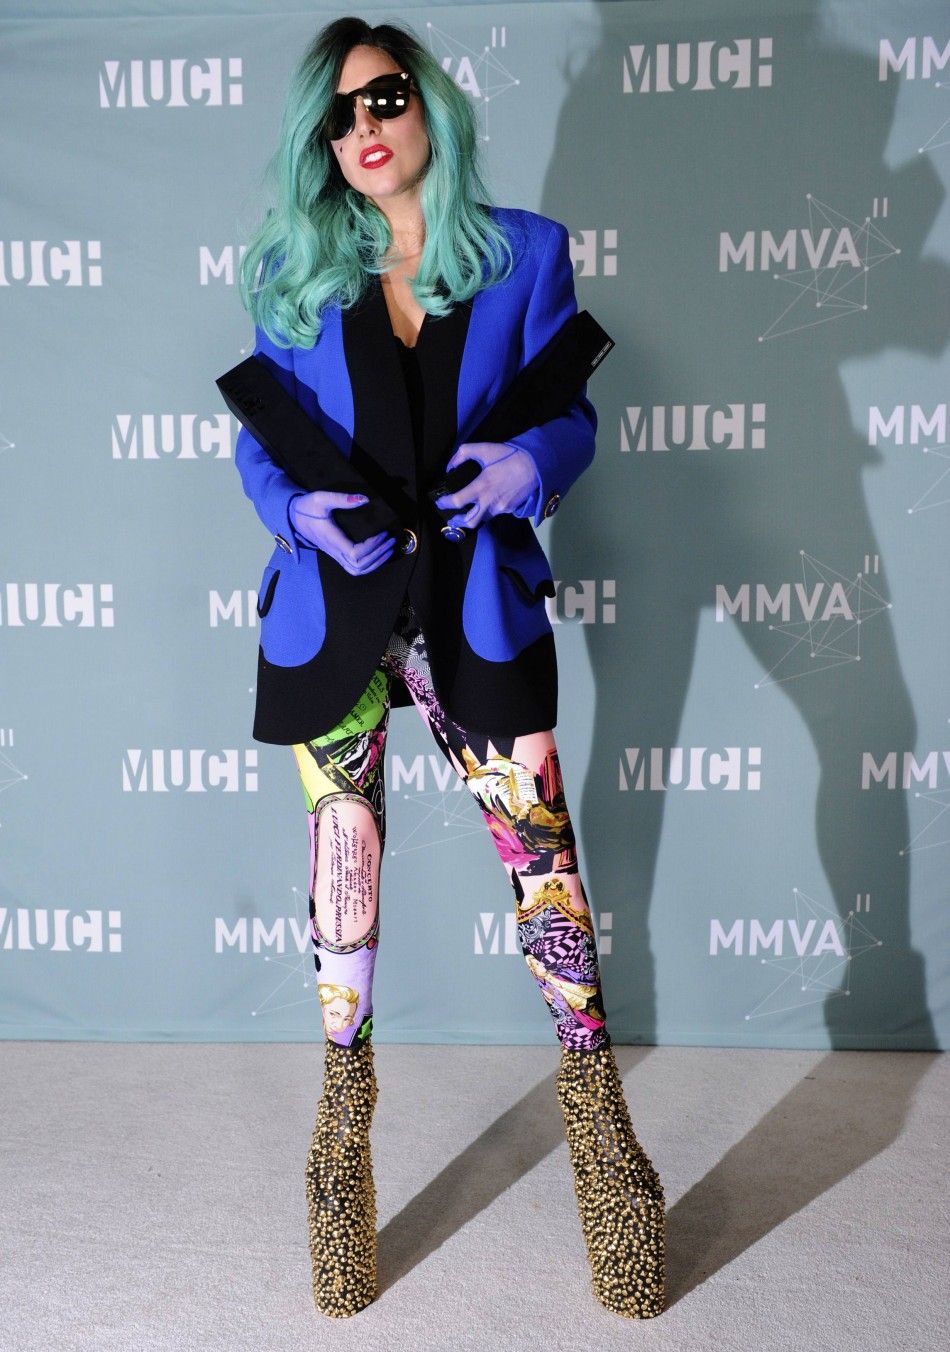 Lady Gagas Most Weird Outfit to Date